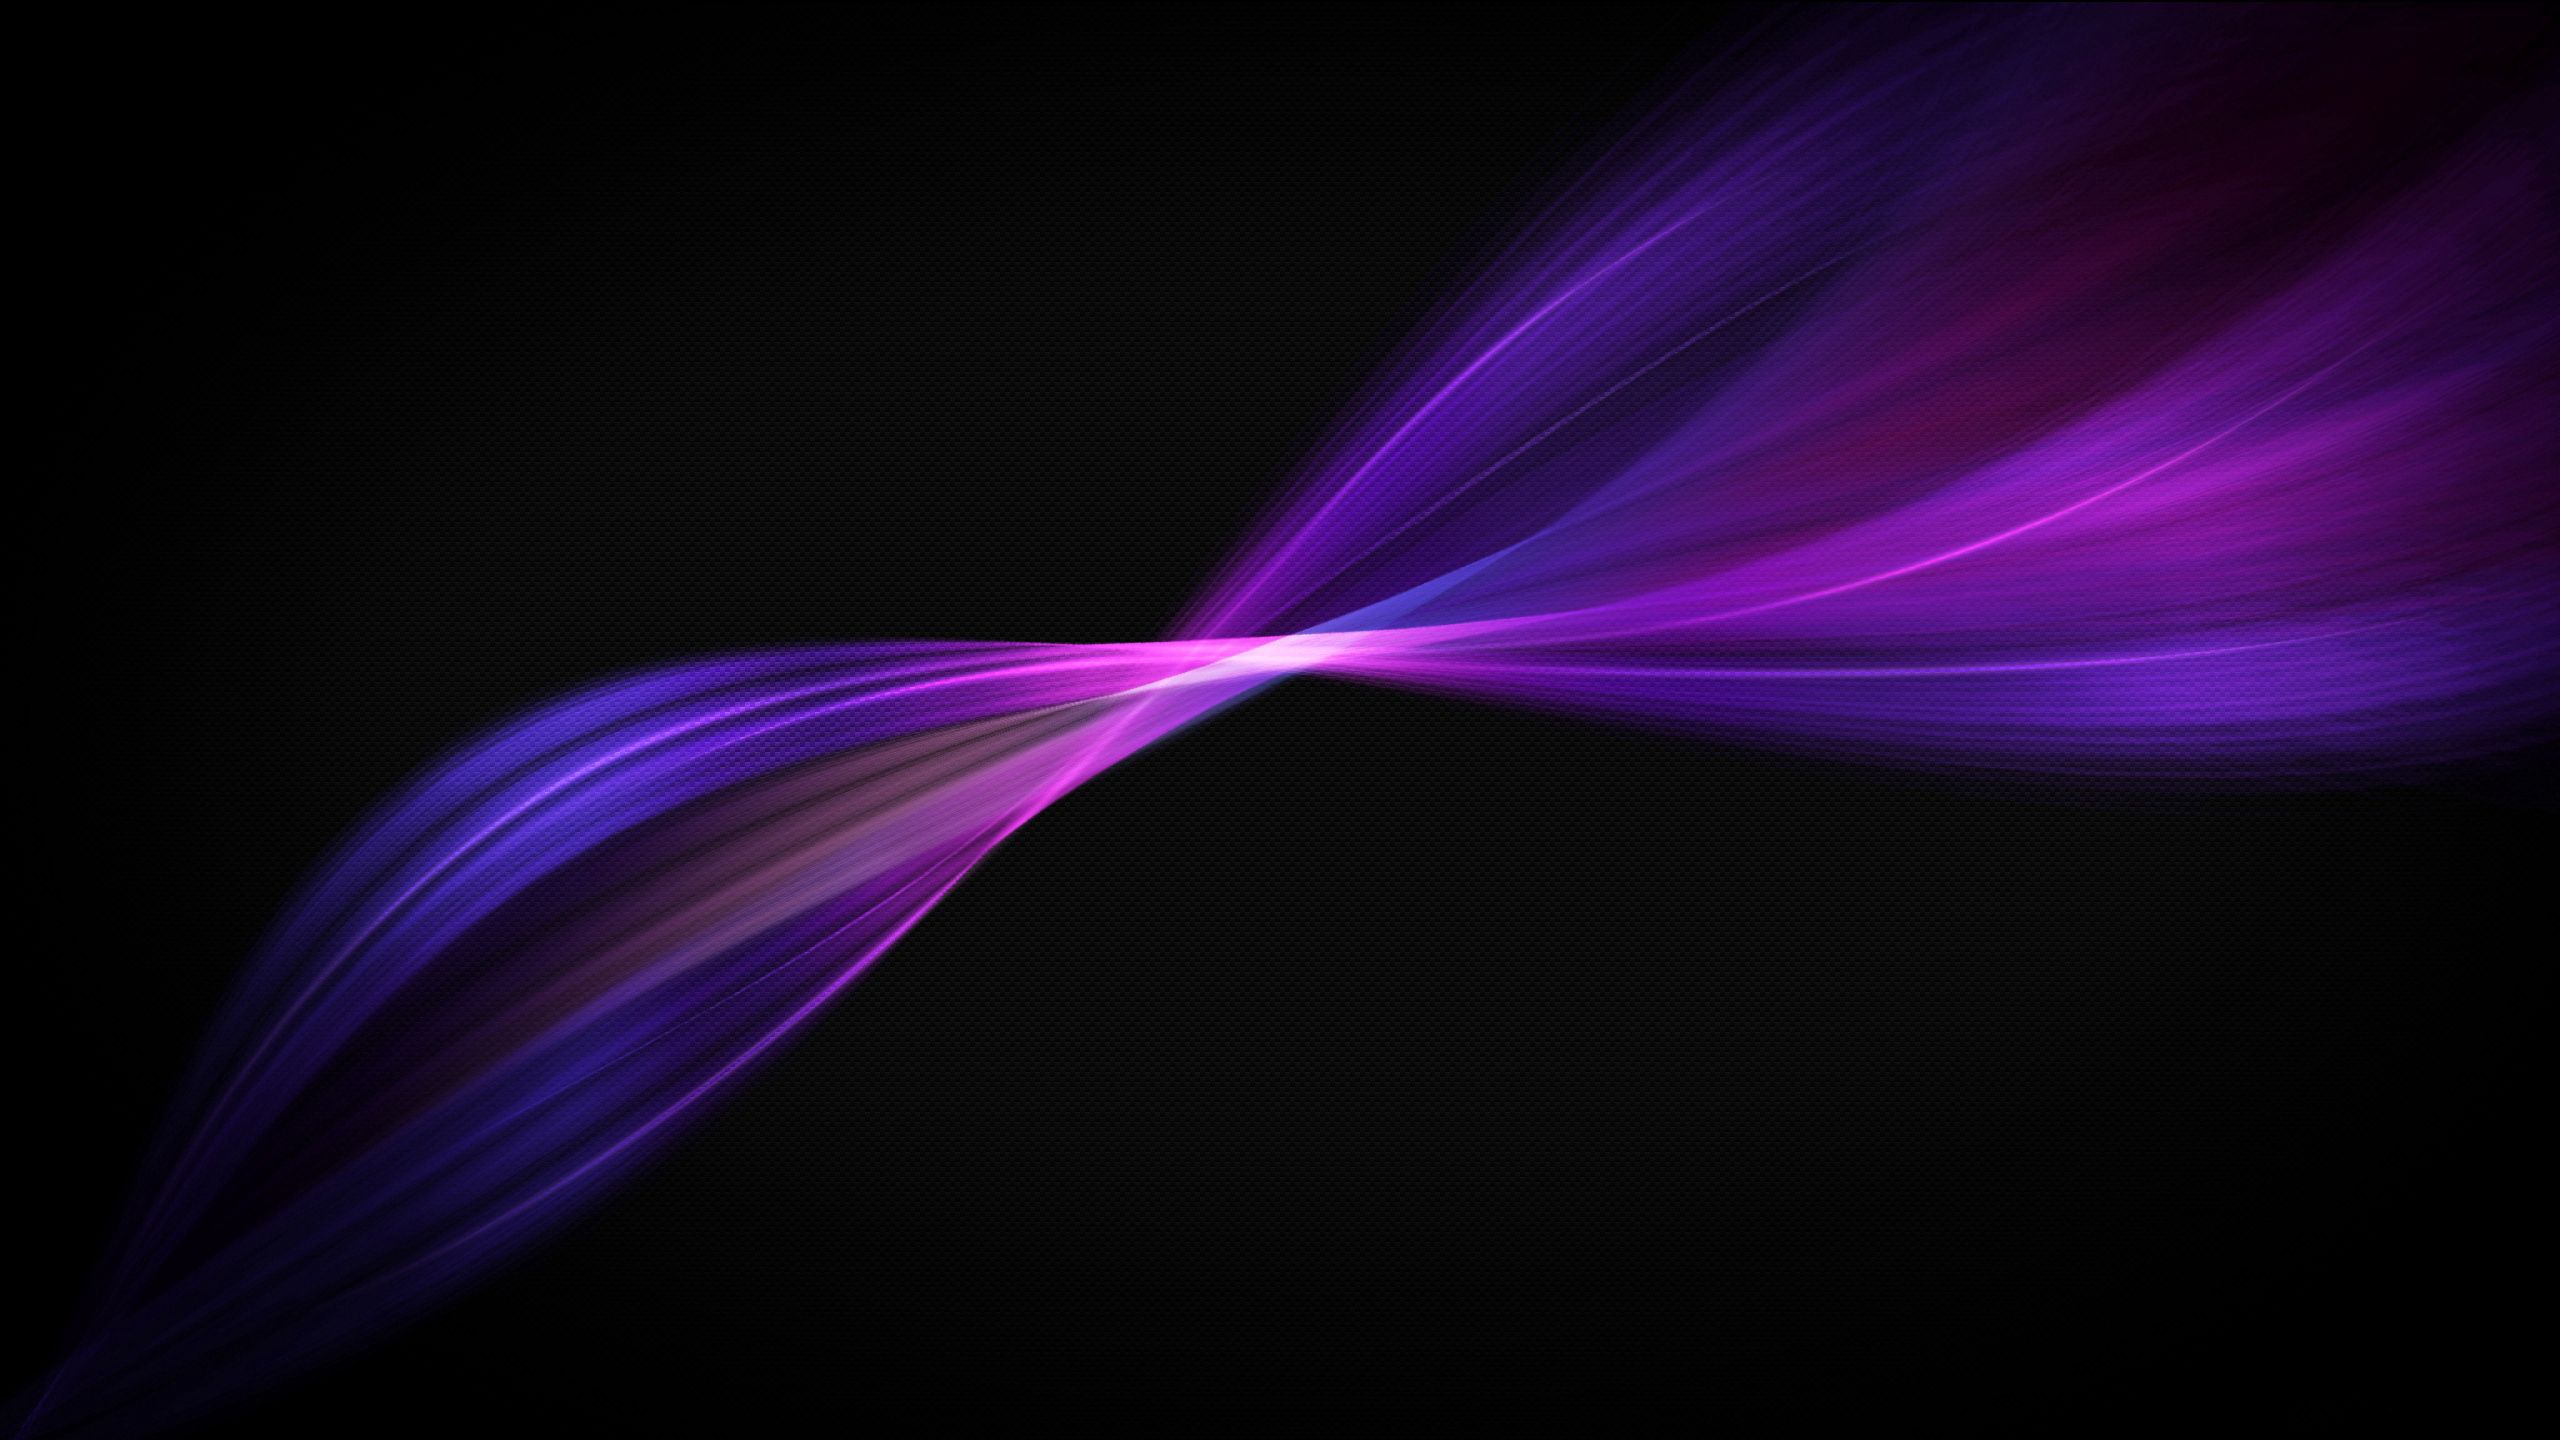 Smartphone Background black, purple, violet, abstract